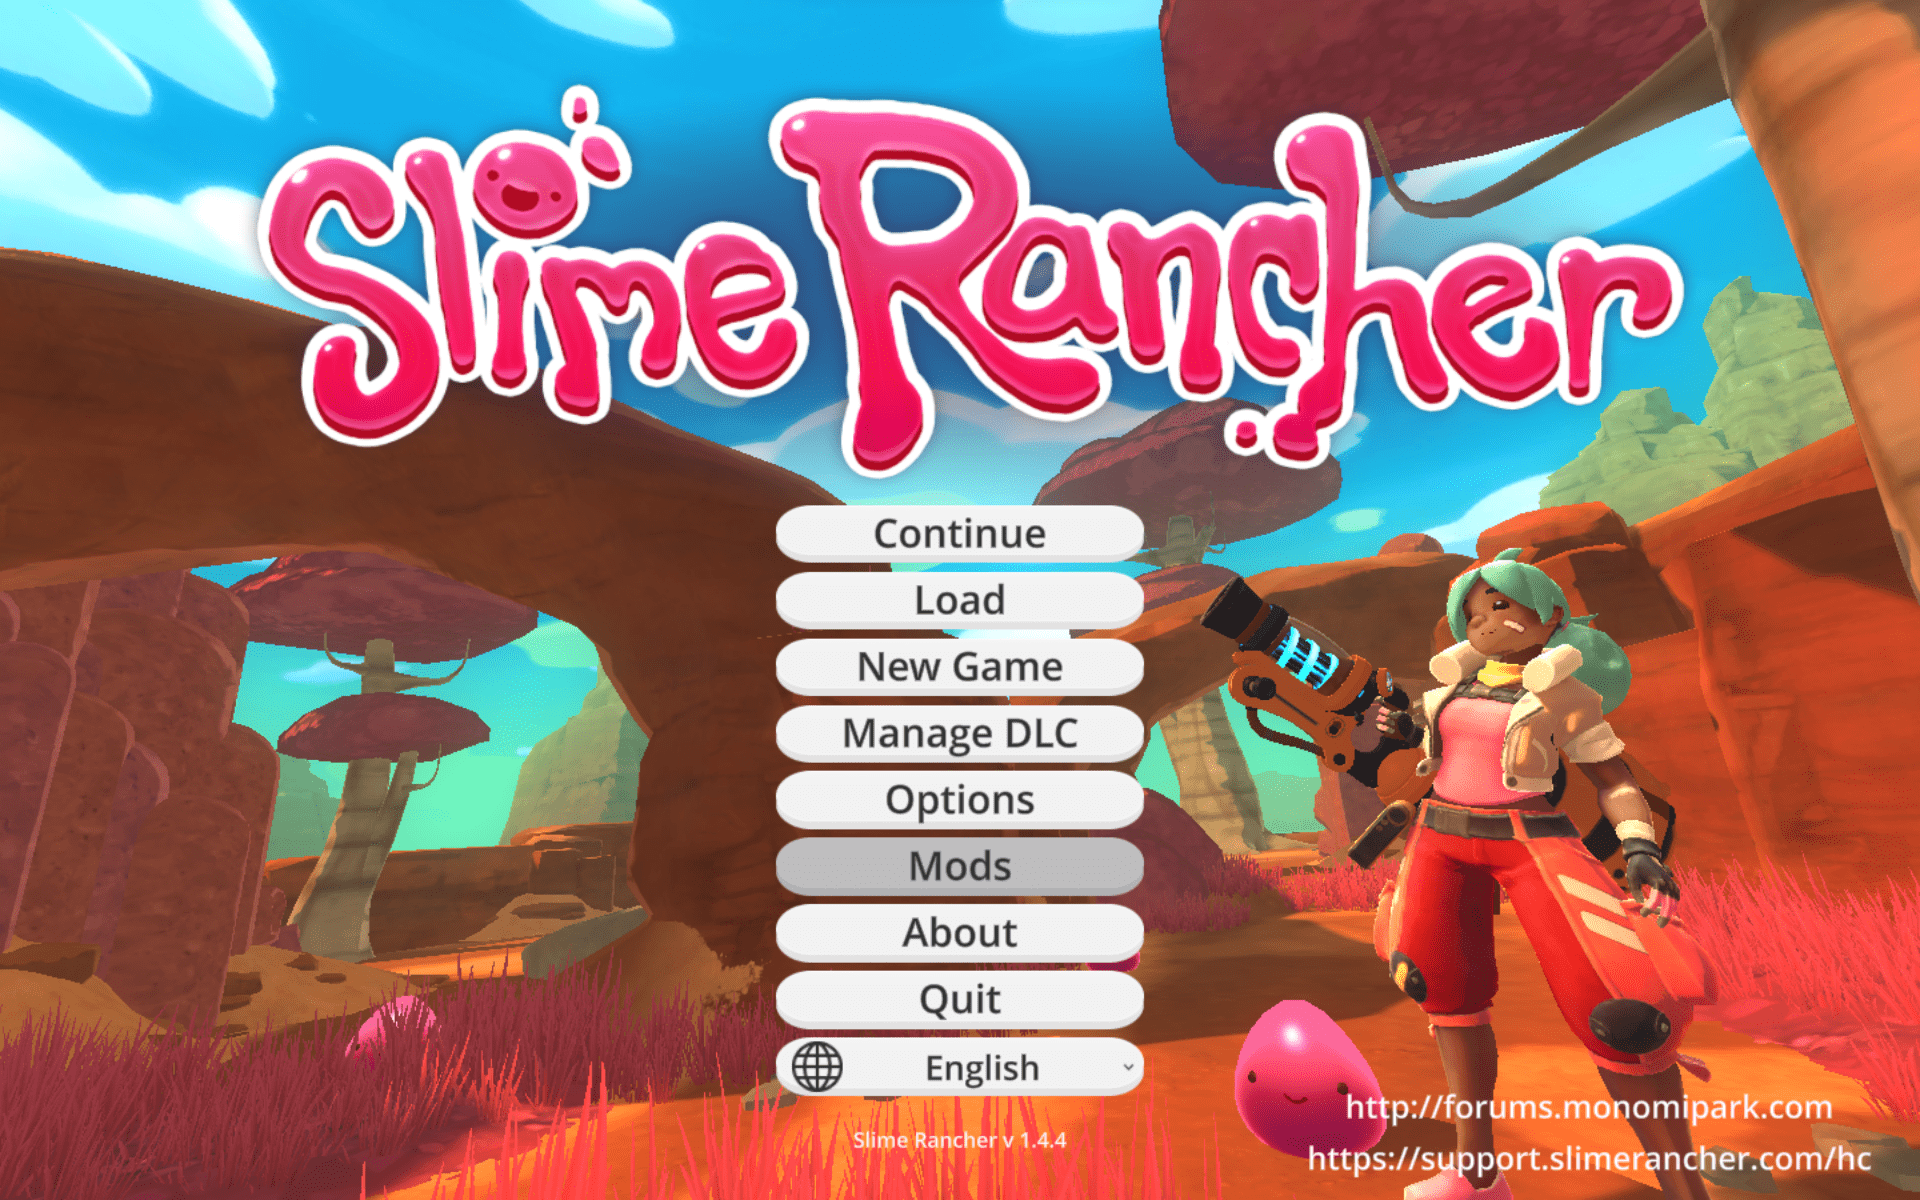 Slime Rancher Mod - Modding of Isaac